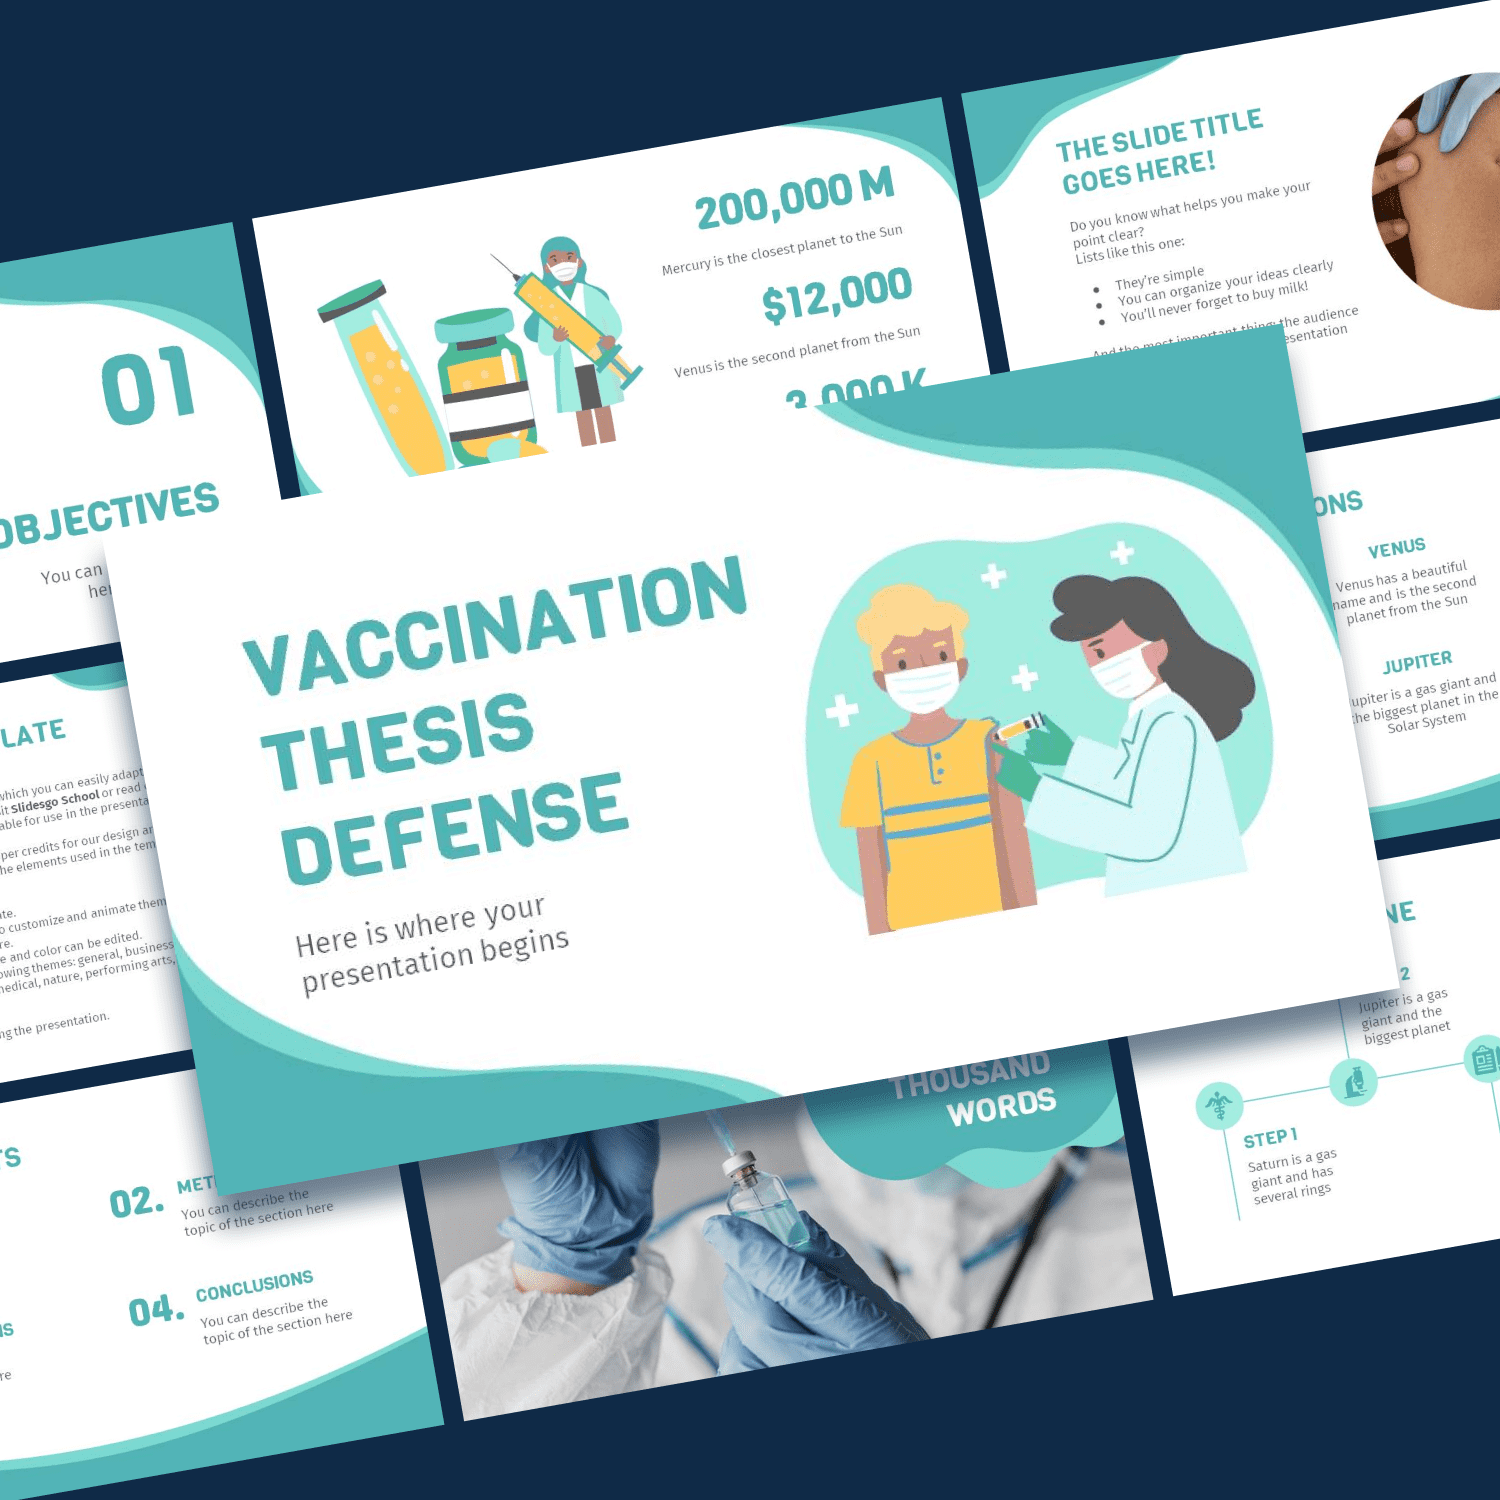 01 Vaccination Thesis Defense Powerpoint Template 1500x1500 1